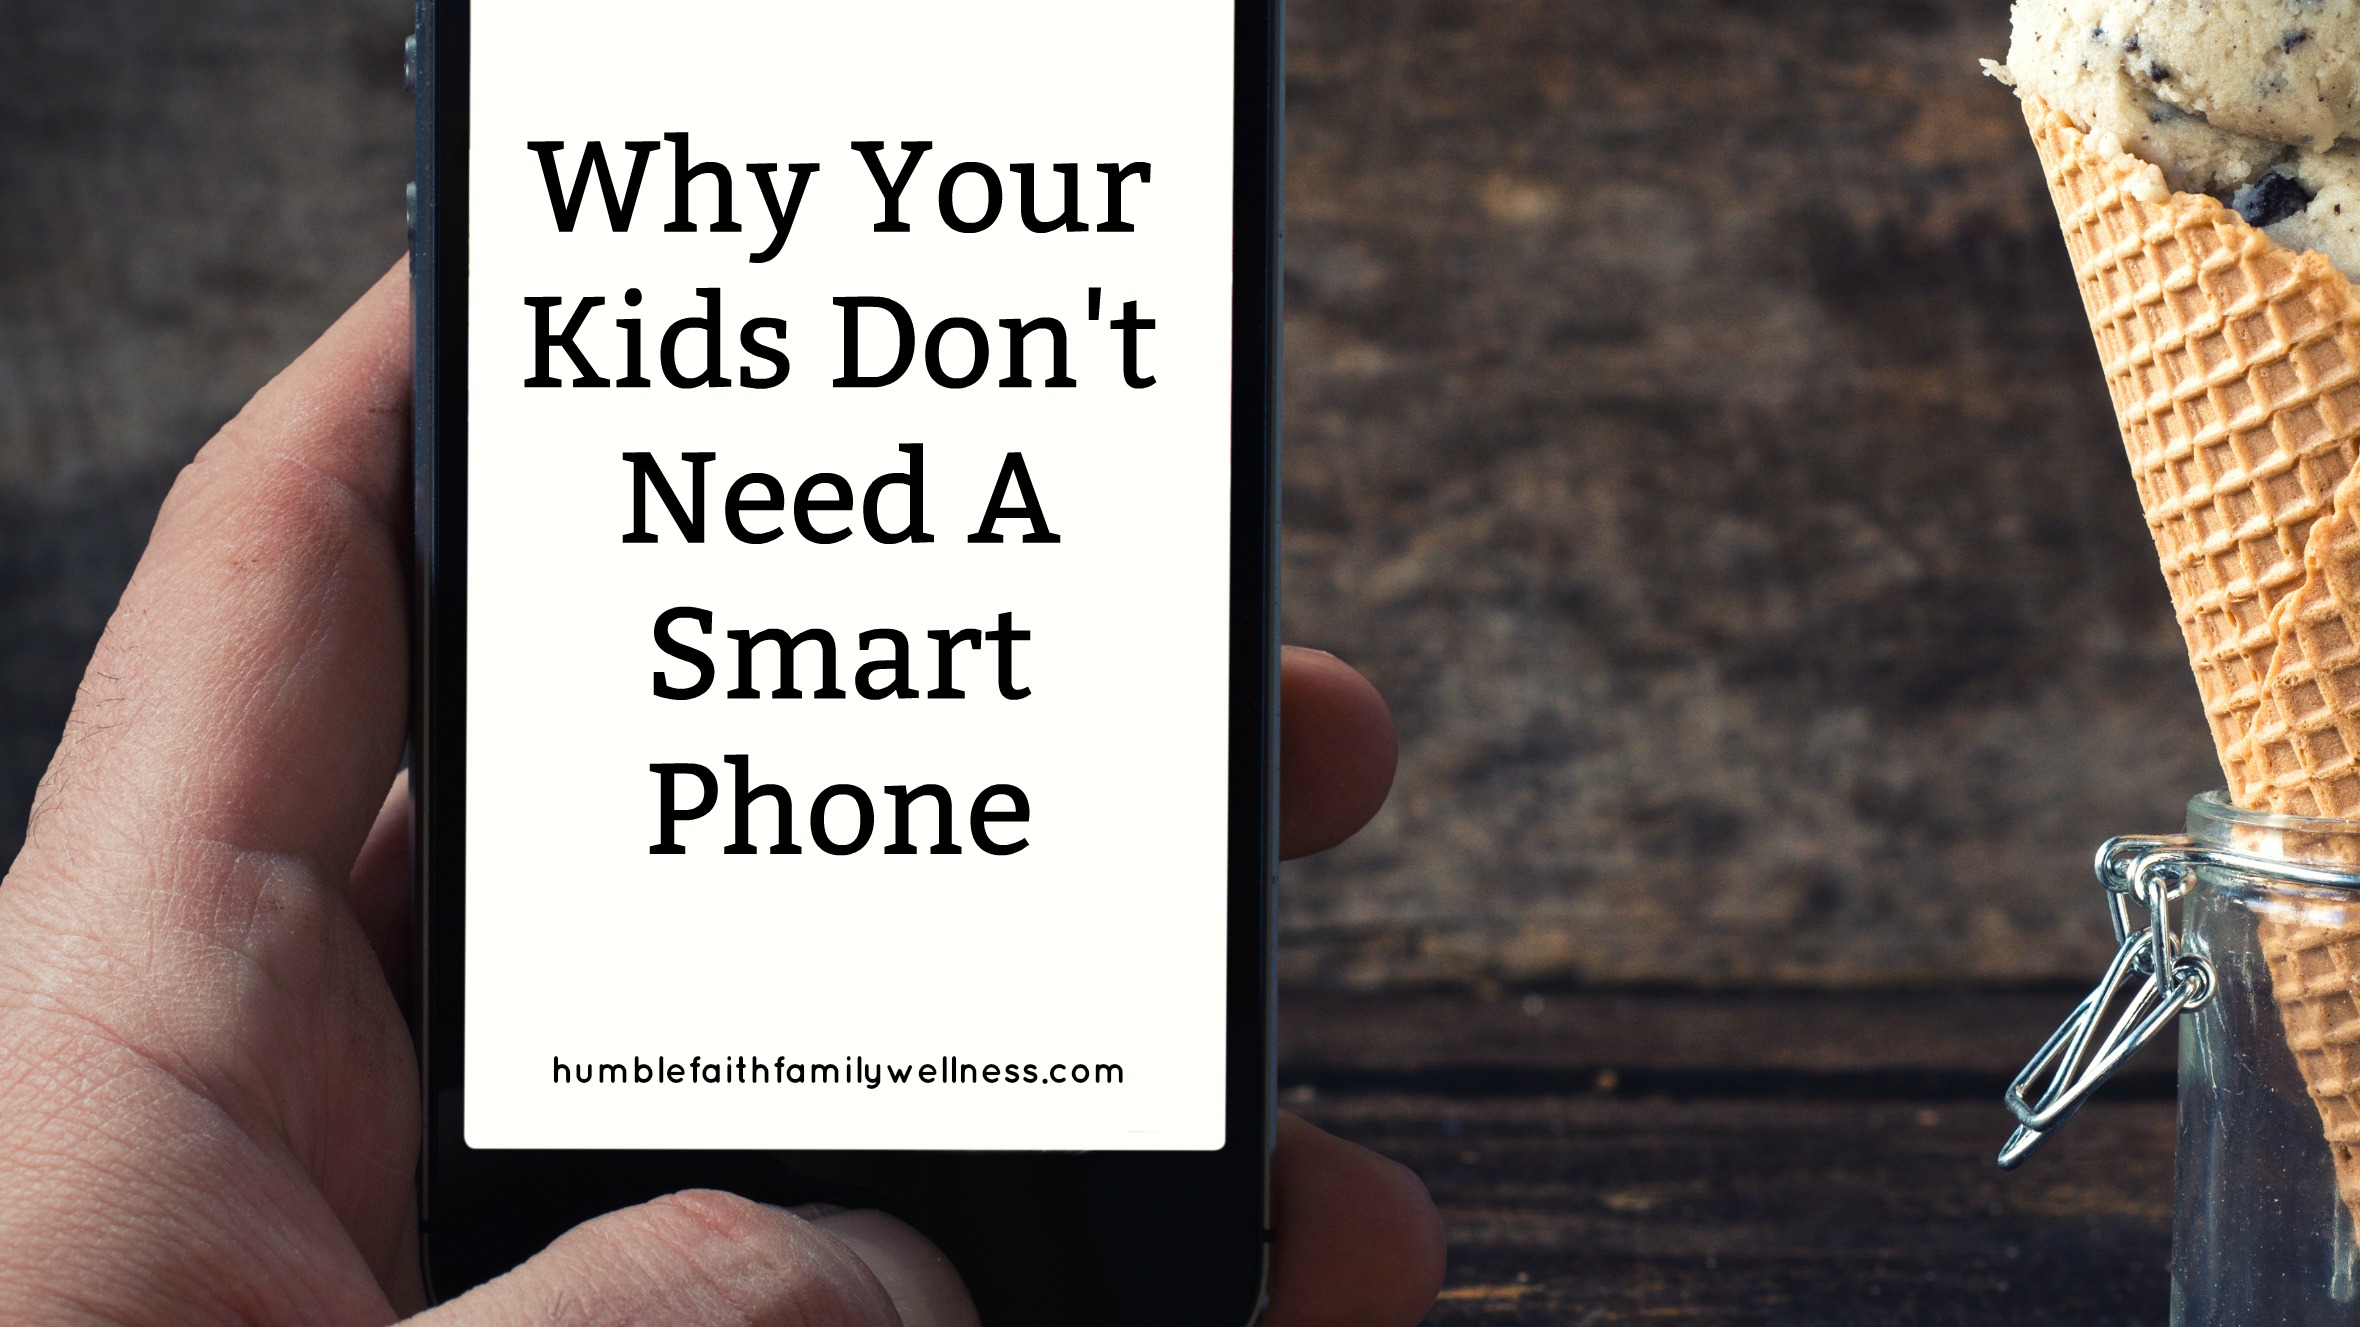 Why your kids don't need a smartphone